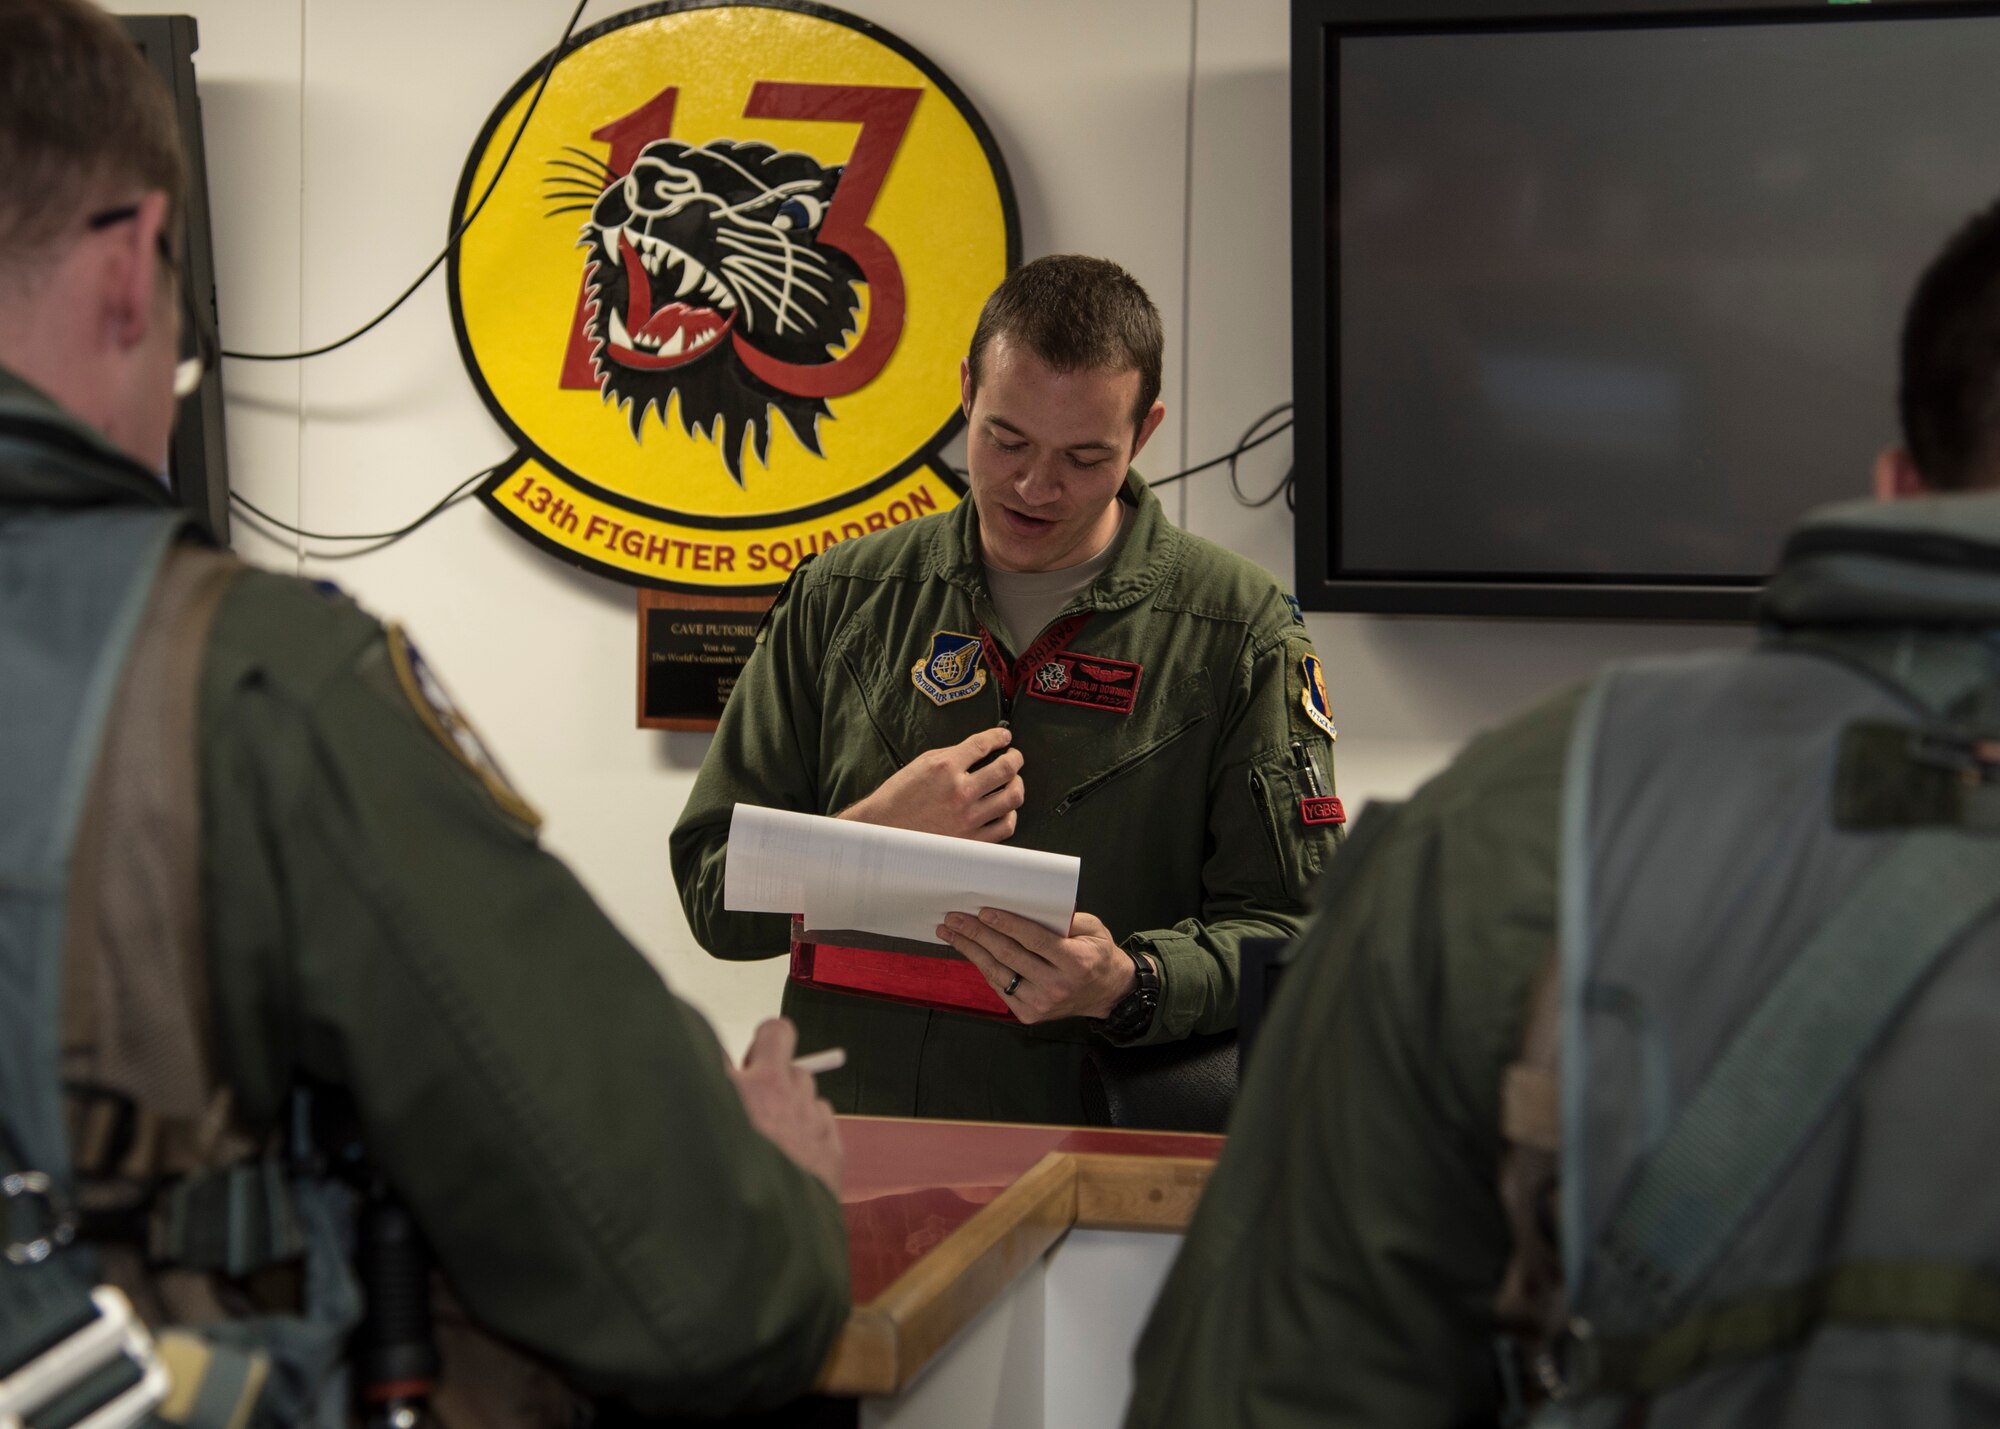 U.S. Air Force Capt. Philip Downing, an F-16 Fighting Falcon pilot with the 13th Fighter Squadron, briefs pilots on the status of F-16s at Misawa Air Base, Japan, May 4, 2016. Downing acts as a conduit between pilots and maintainers so all information regarding the safety and condition of the aircraft is accurately relayed. (U.S. Air Force photo by Airman 1st Class Jordyn Fetter)